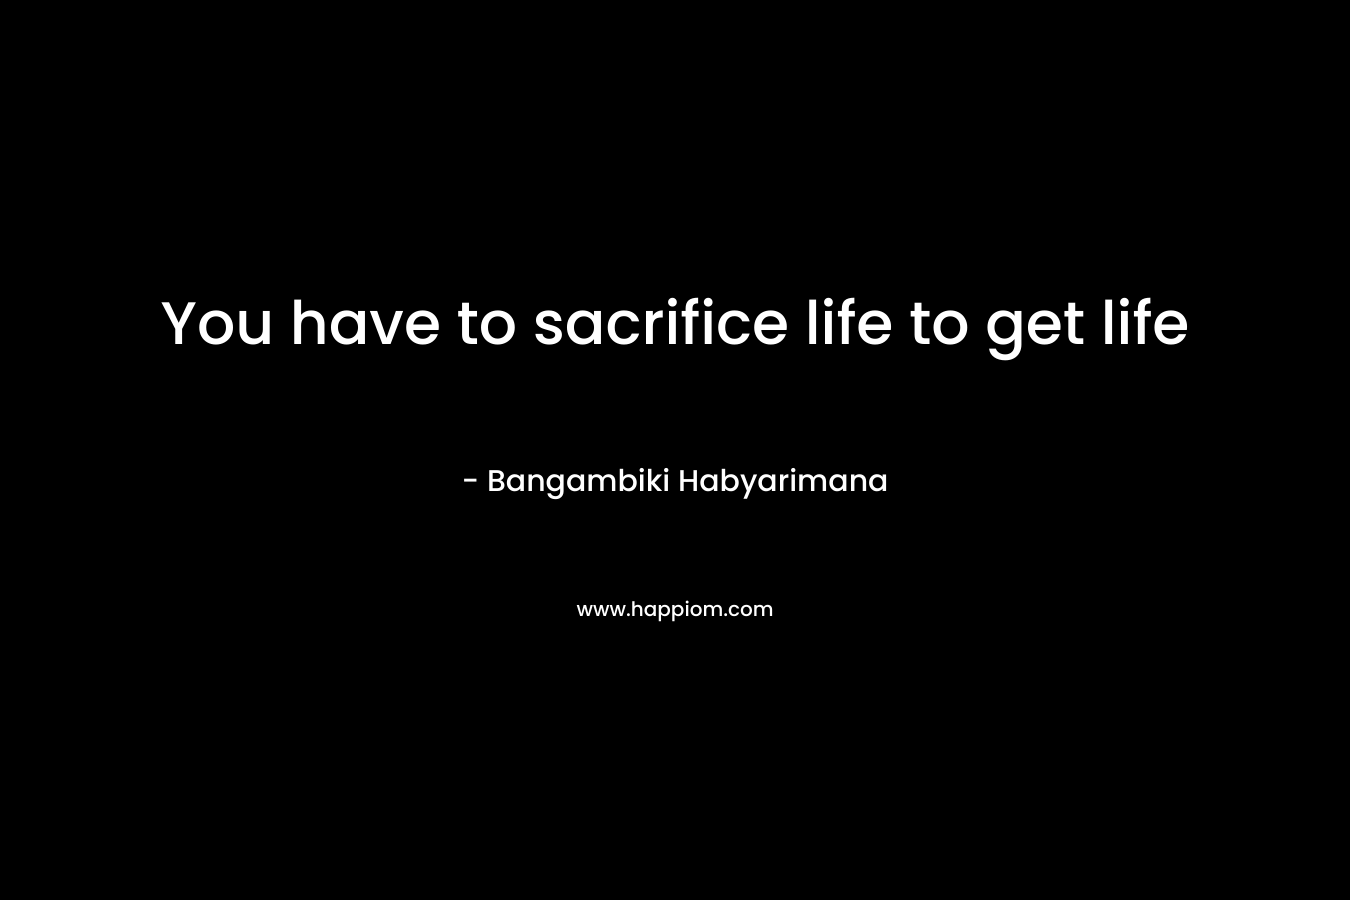 You have to sacrifice life to get life